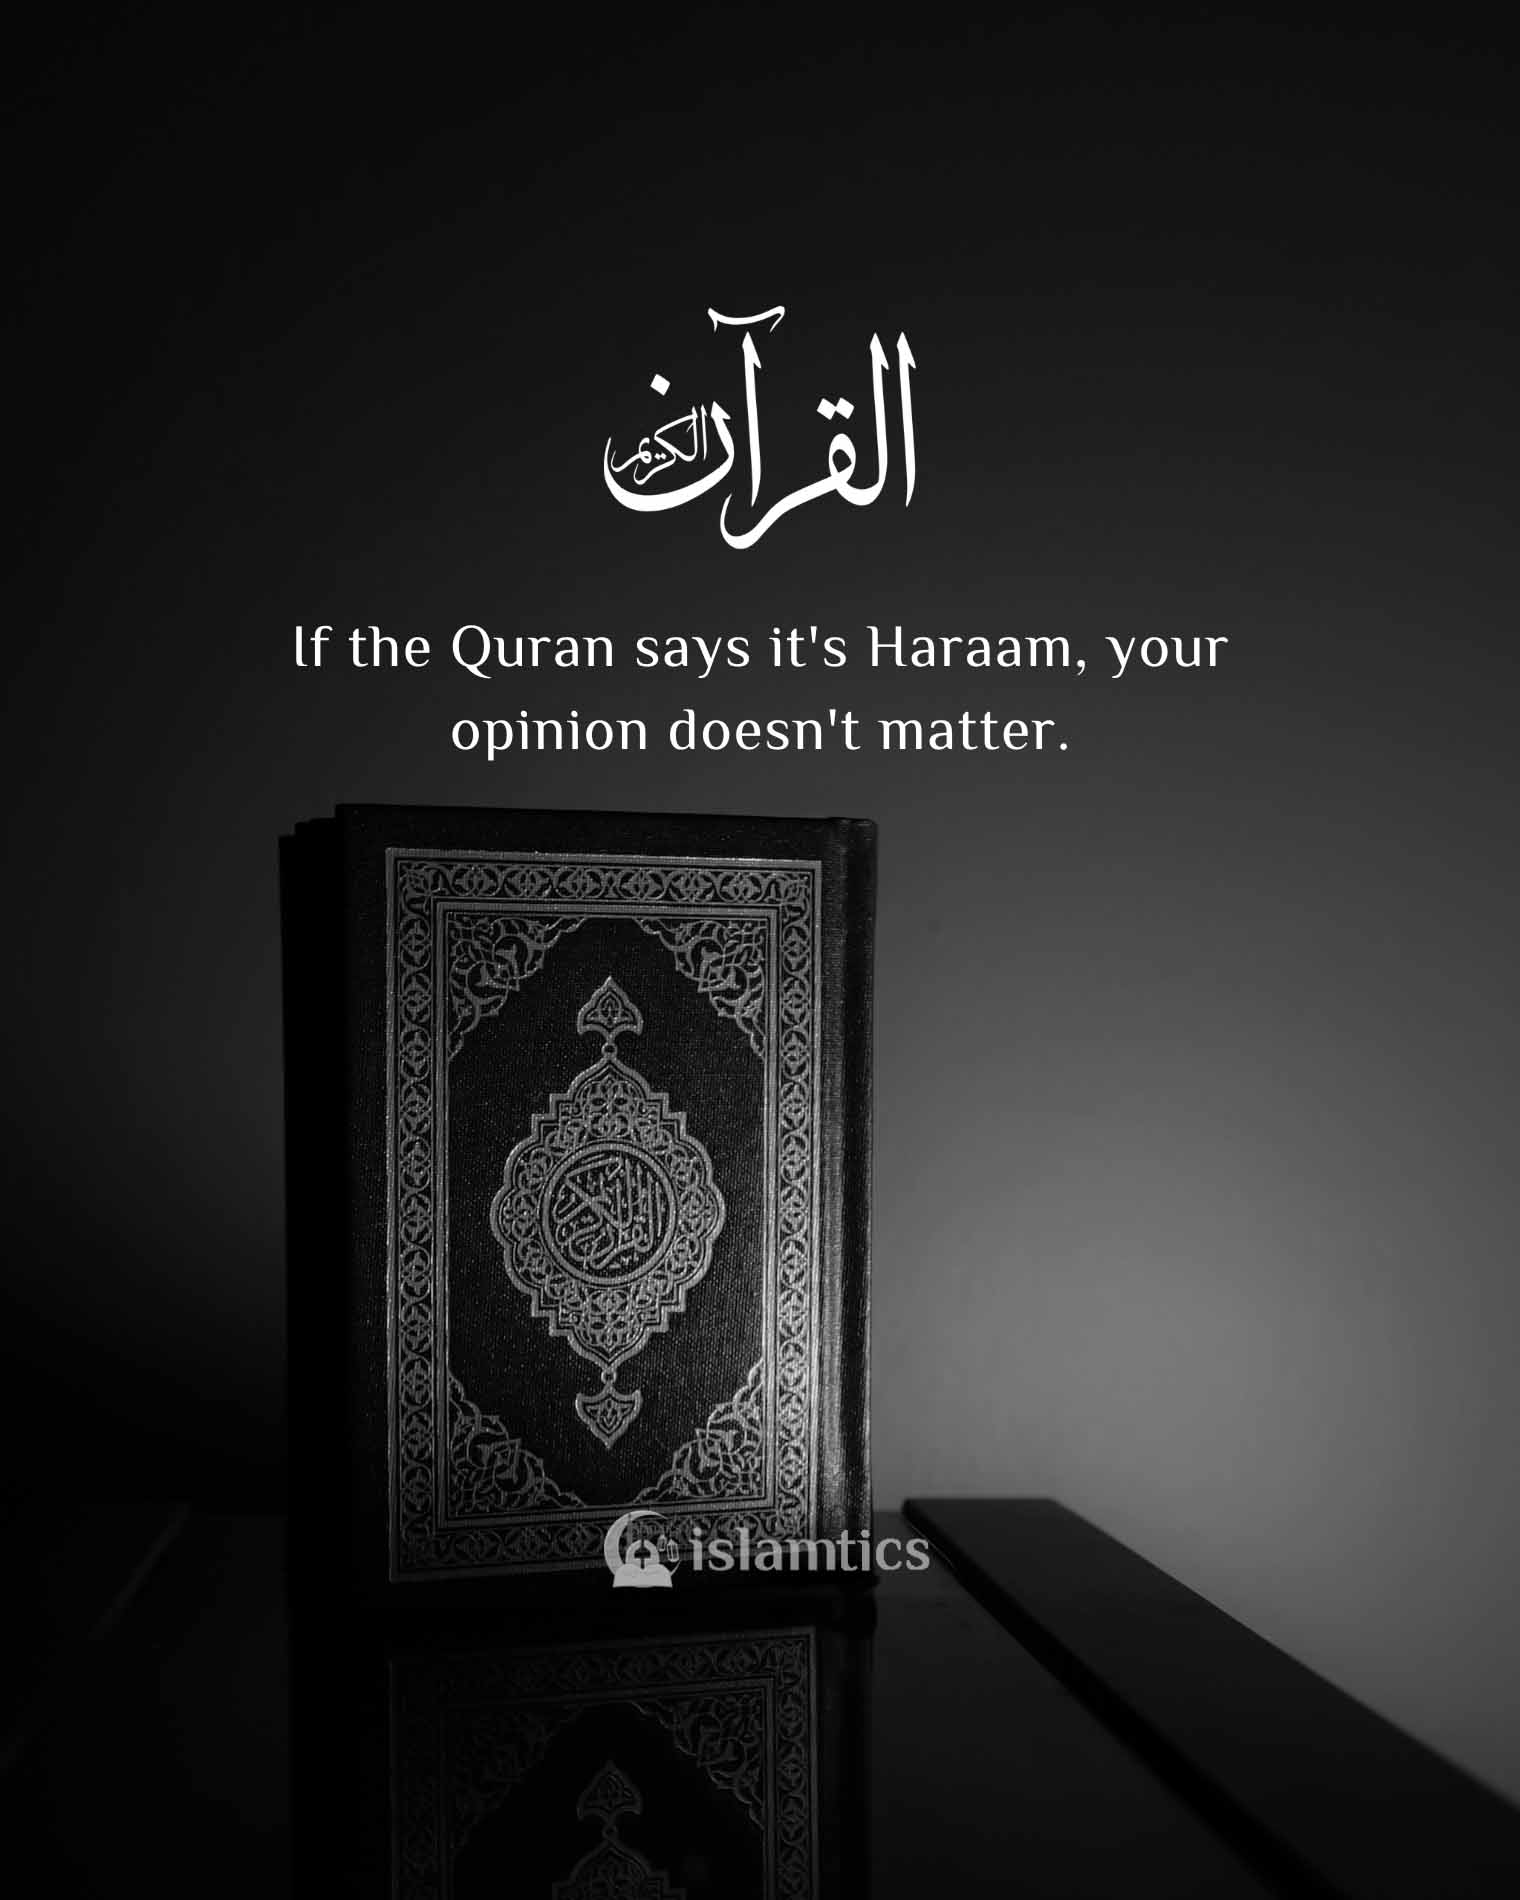  If the Quran says it’s Haraam, your opinion doesn’t matter.